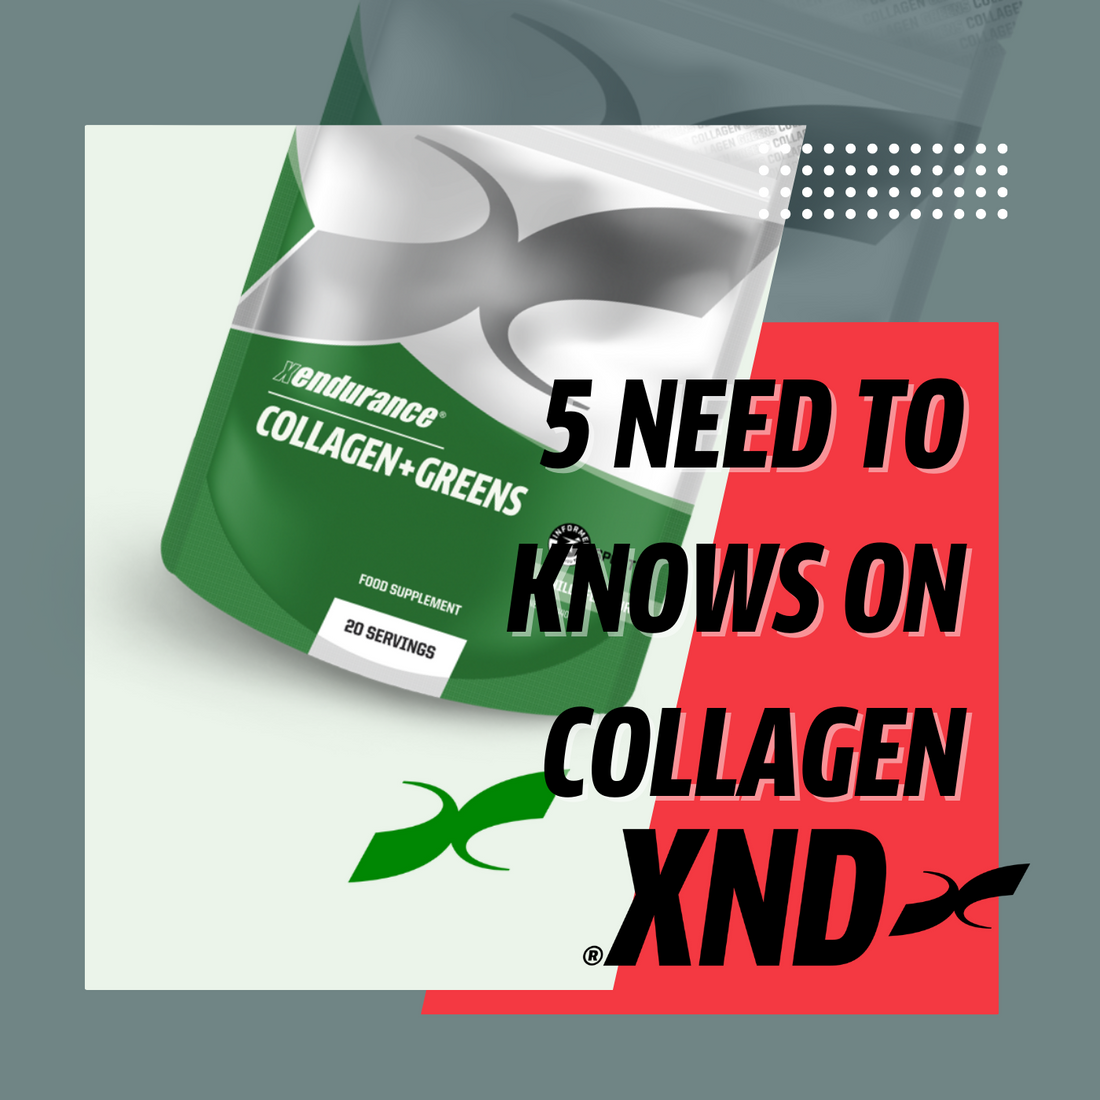 5 Need-To-Knows on Collagen